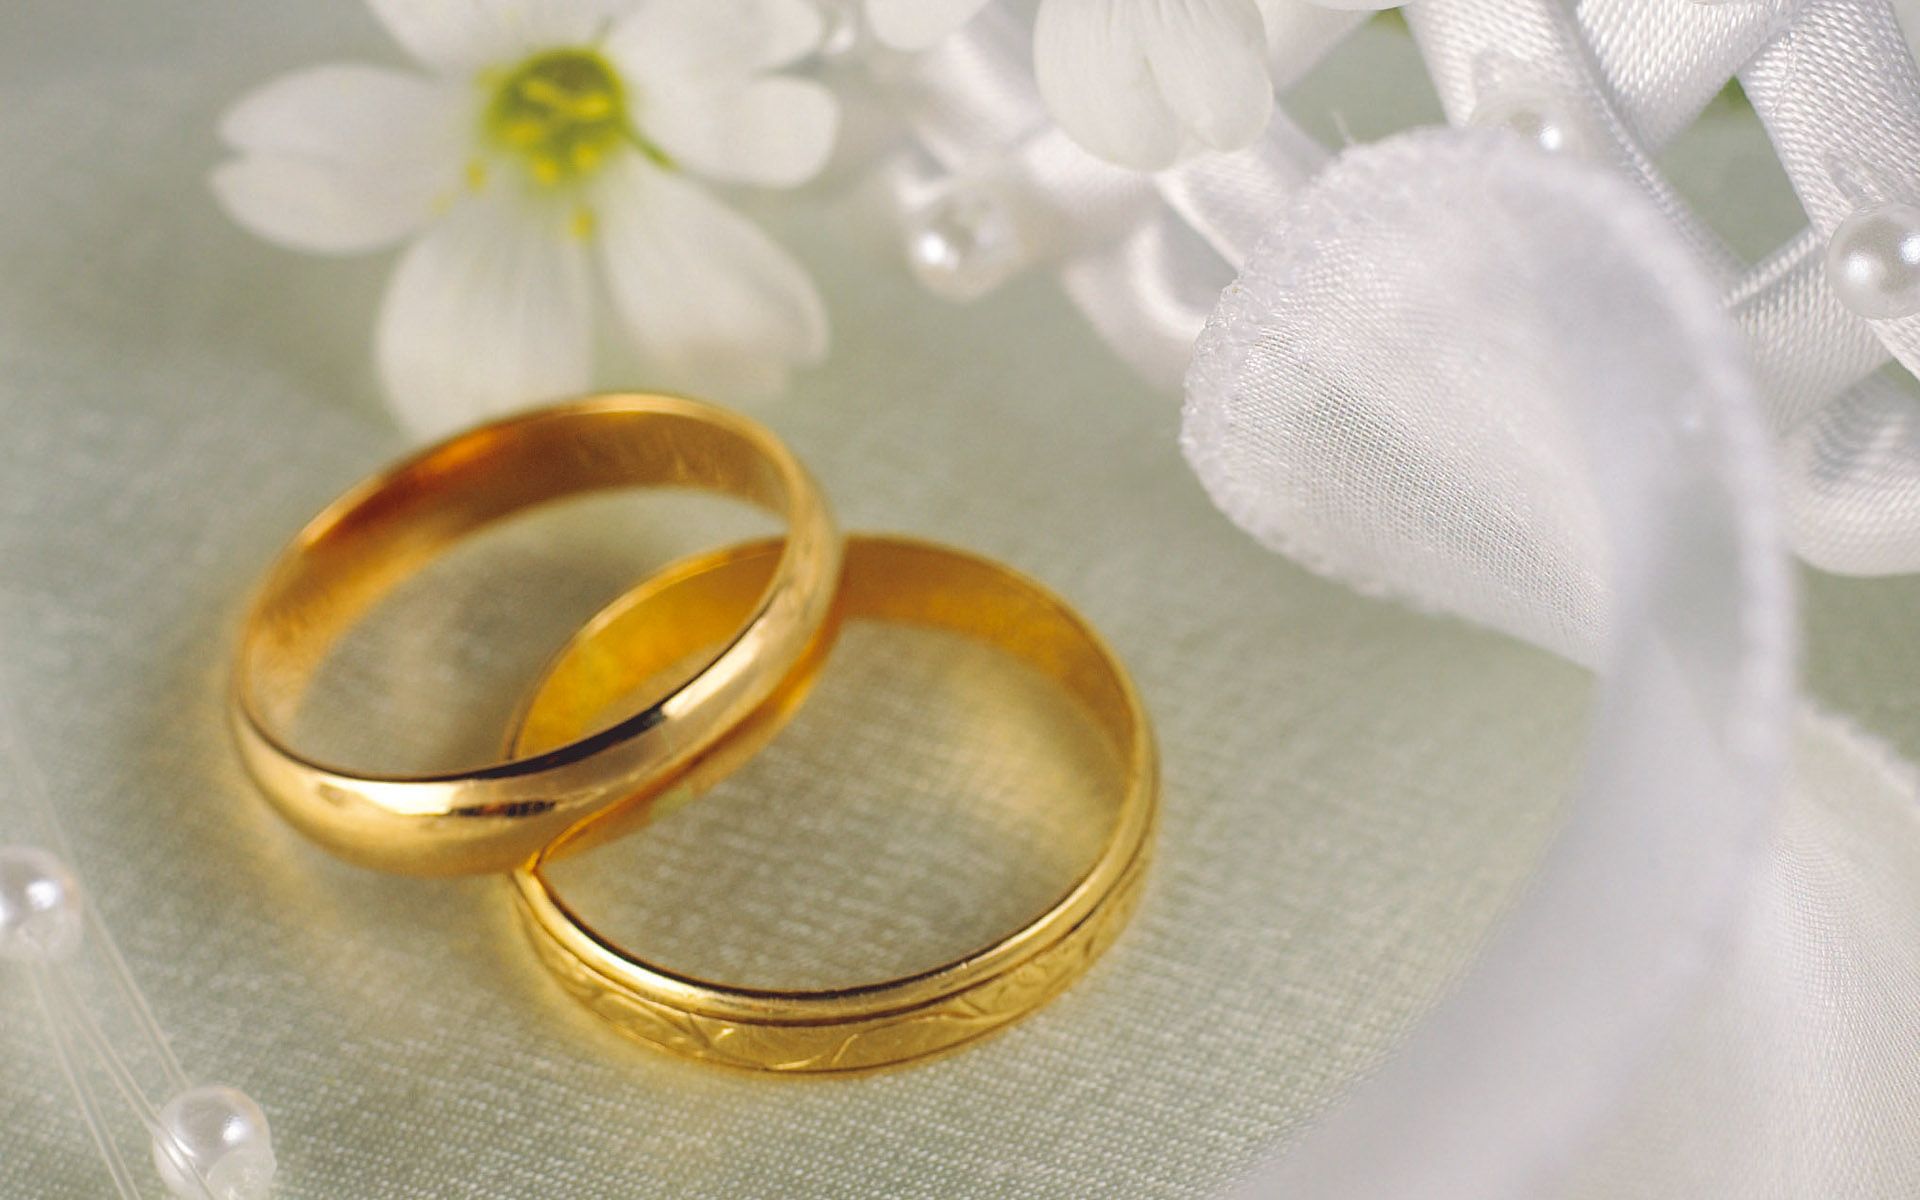 Wedding Ring Wallpapers - HD Wallpapers 83844